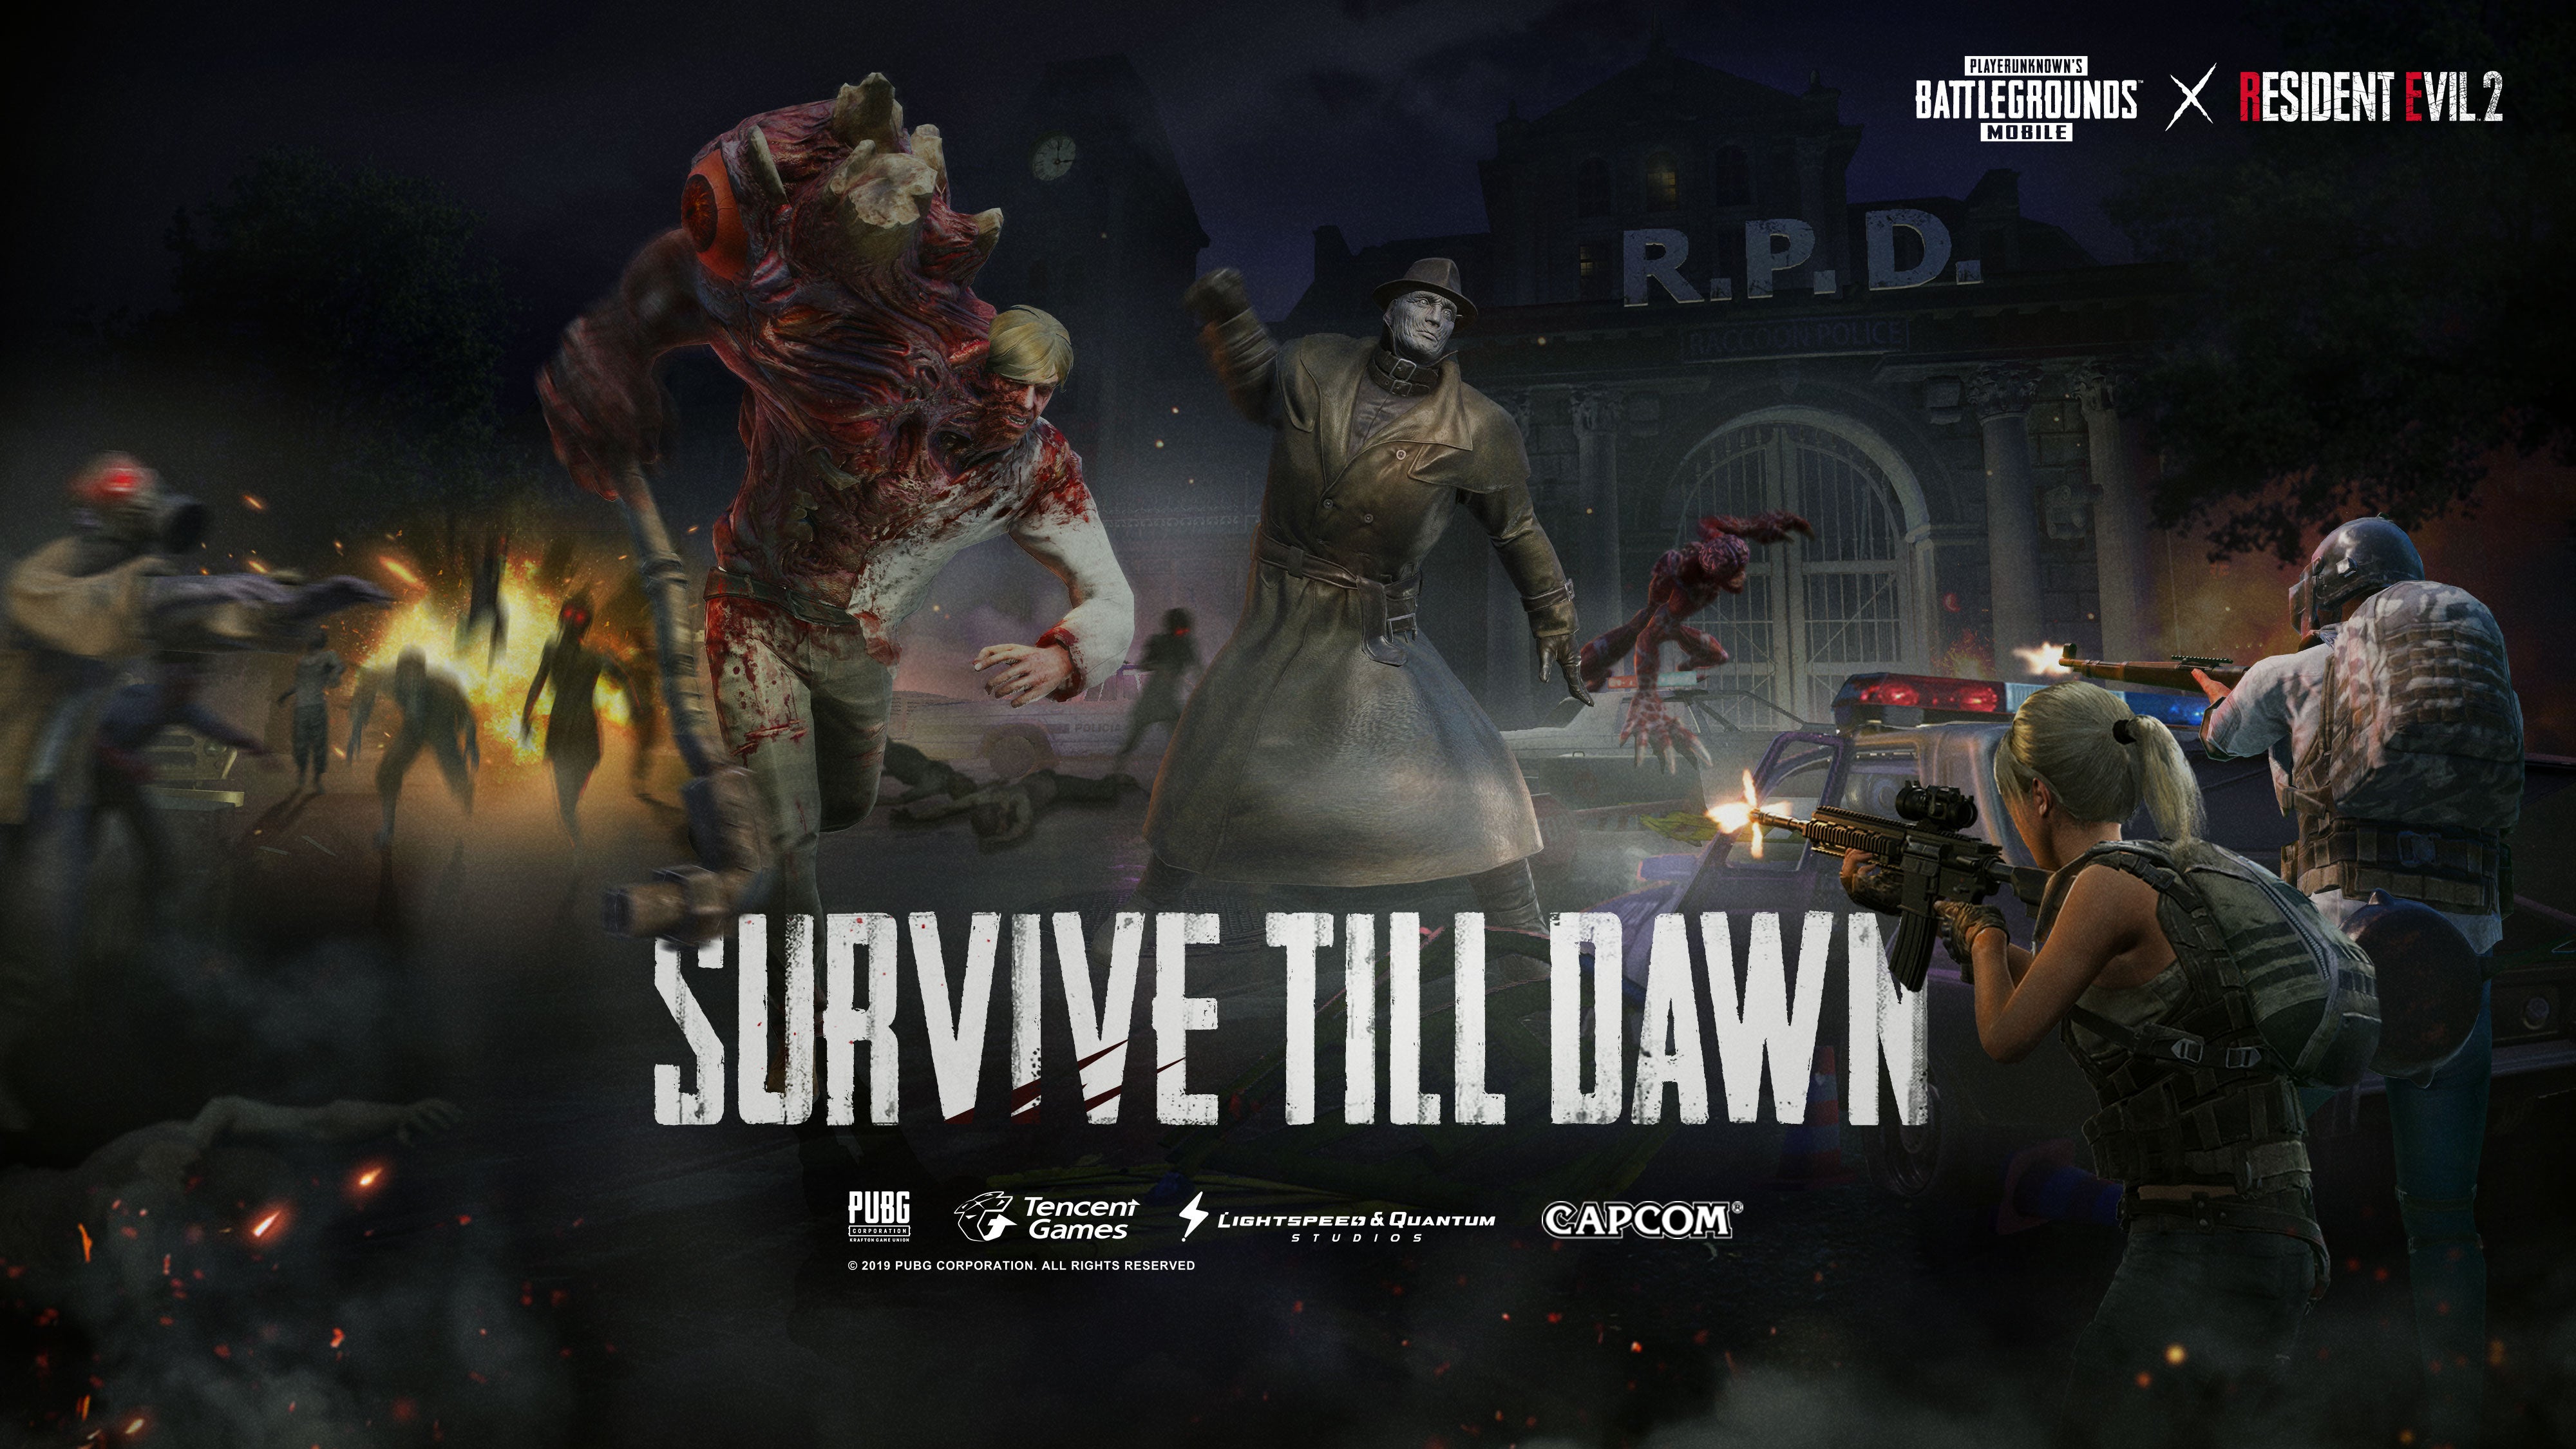 Image for PUBG Mobile x Resident Evil 2 cross-over event mode is live